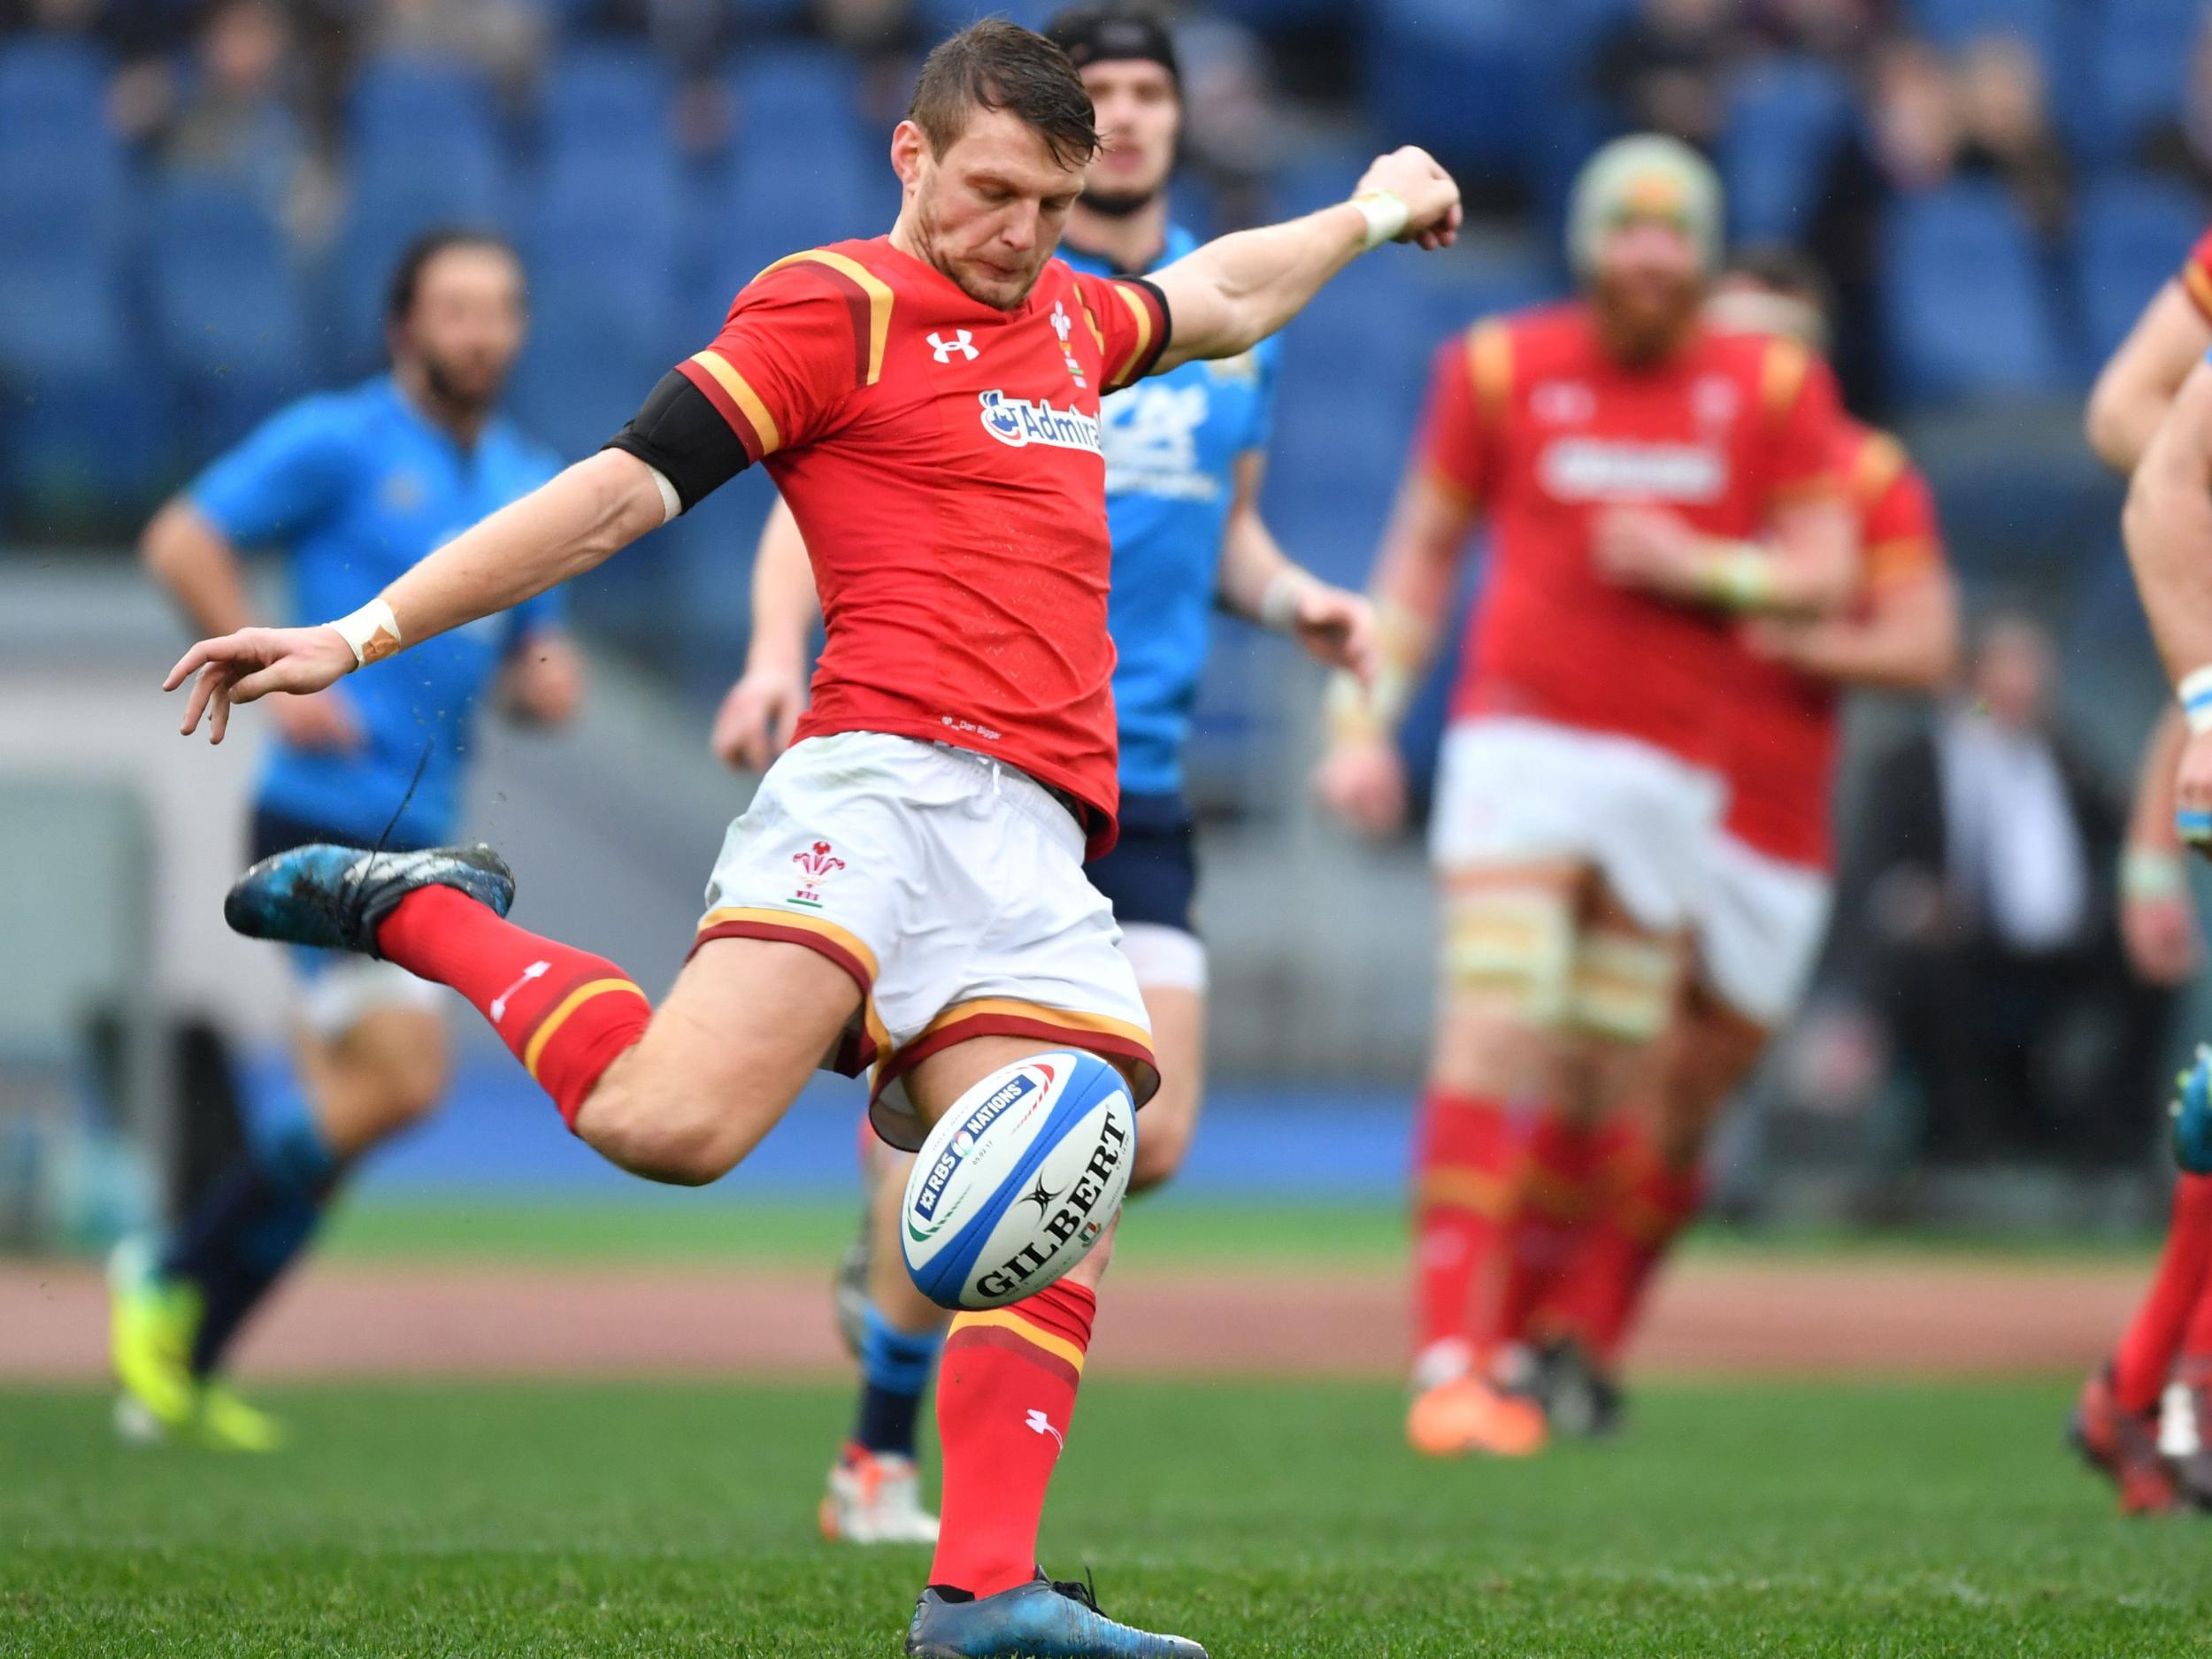 Biggar was forced off at half time with a side strain